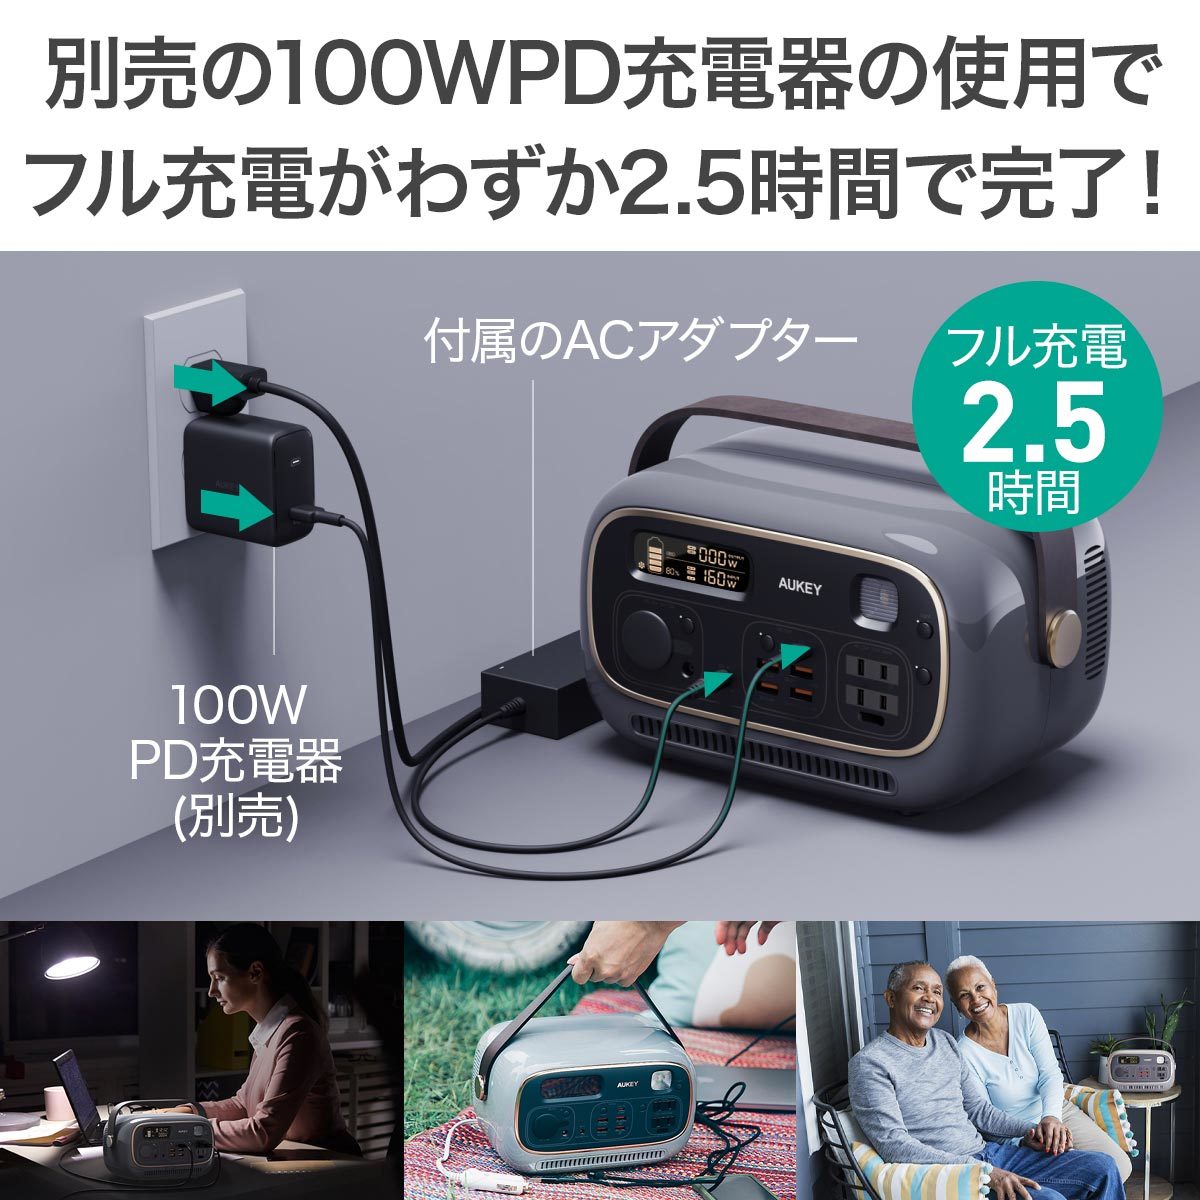 297Wh ポータブル電源 PS-RE03